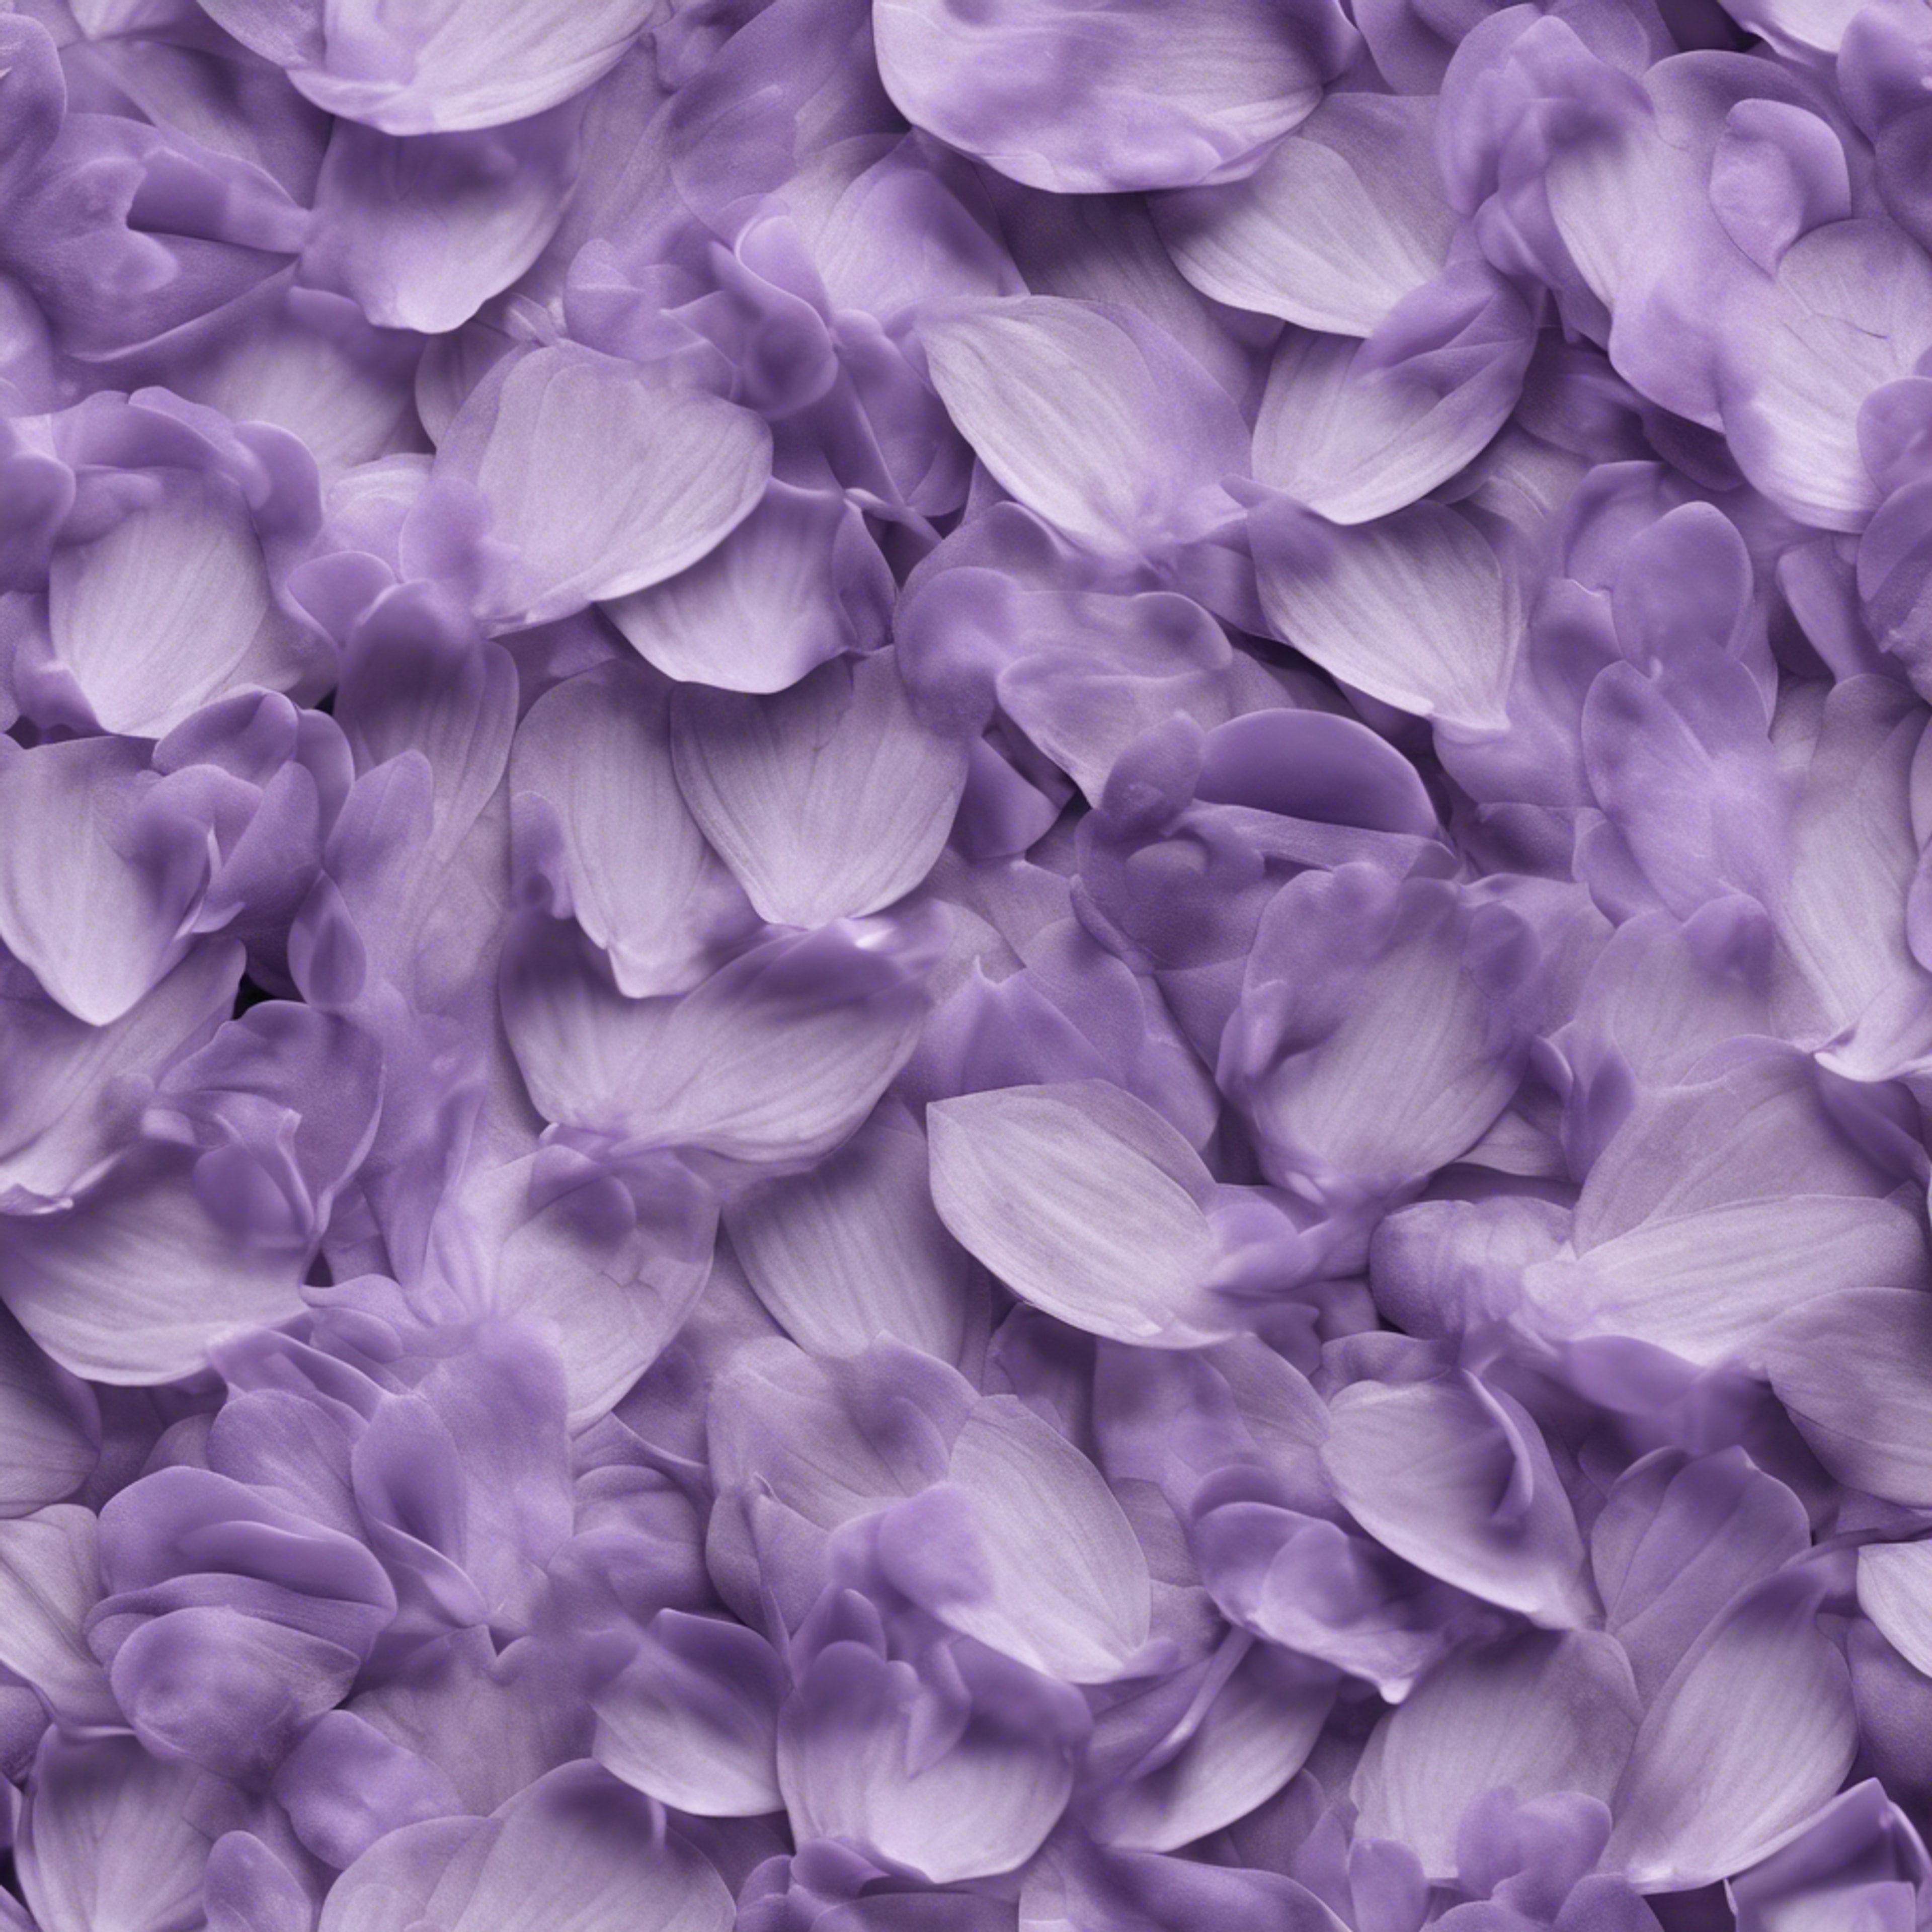 Seamless delicate pattern of layered lavender petals Tapeta[df581ced6ed94056816b]